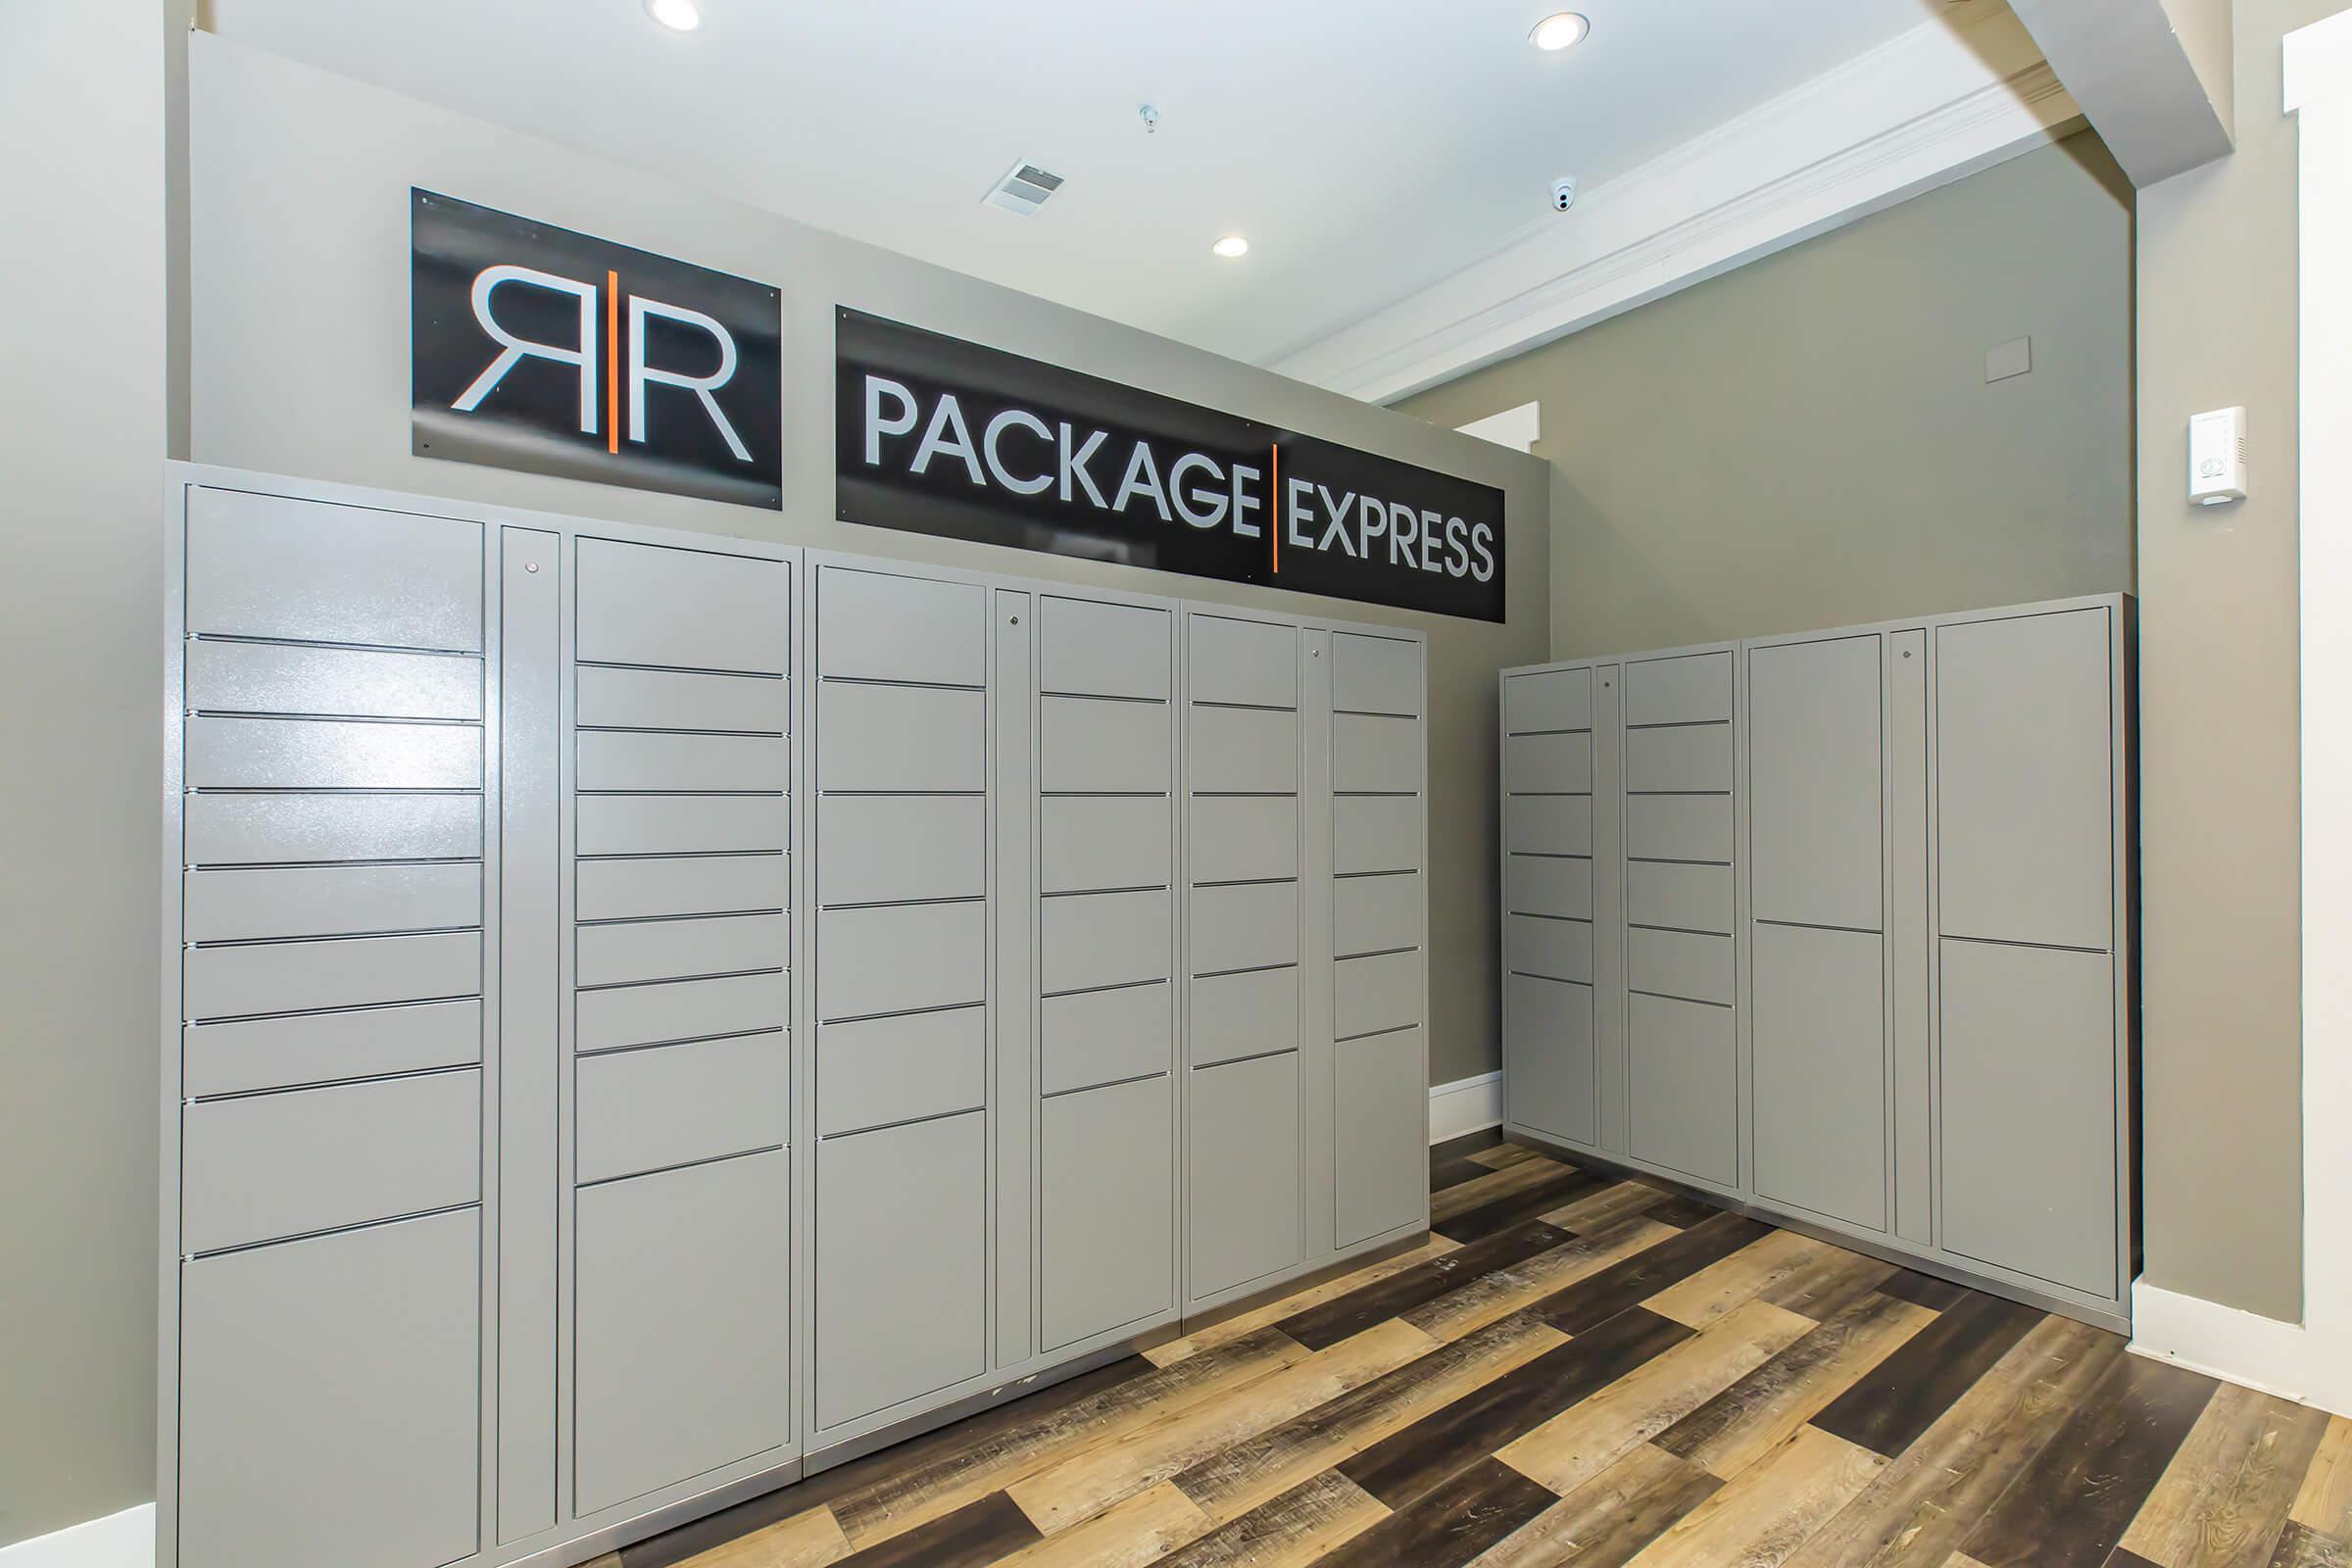 The Ranch at Ridgeview Apartments package locker